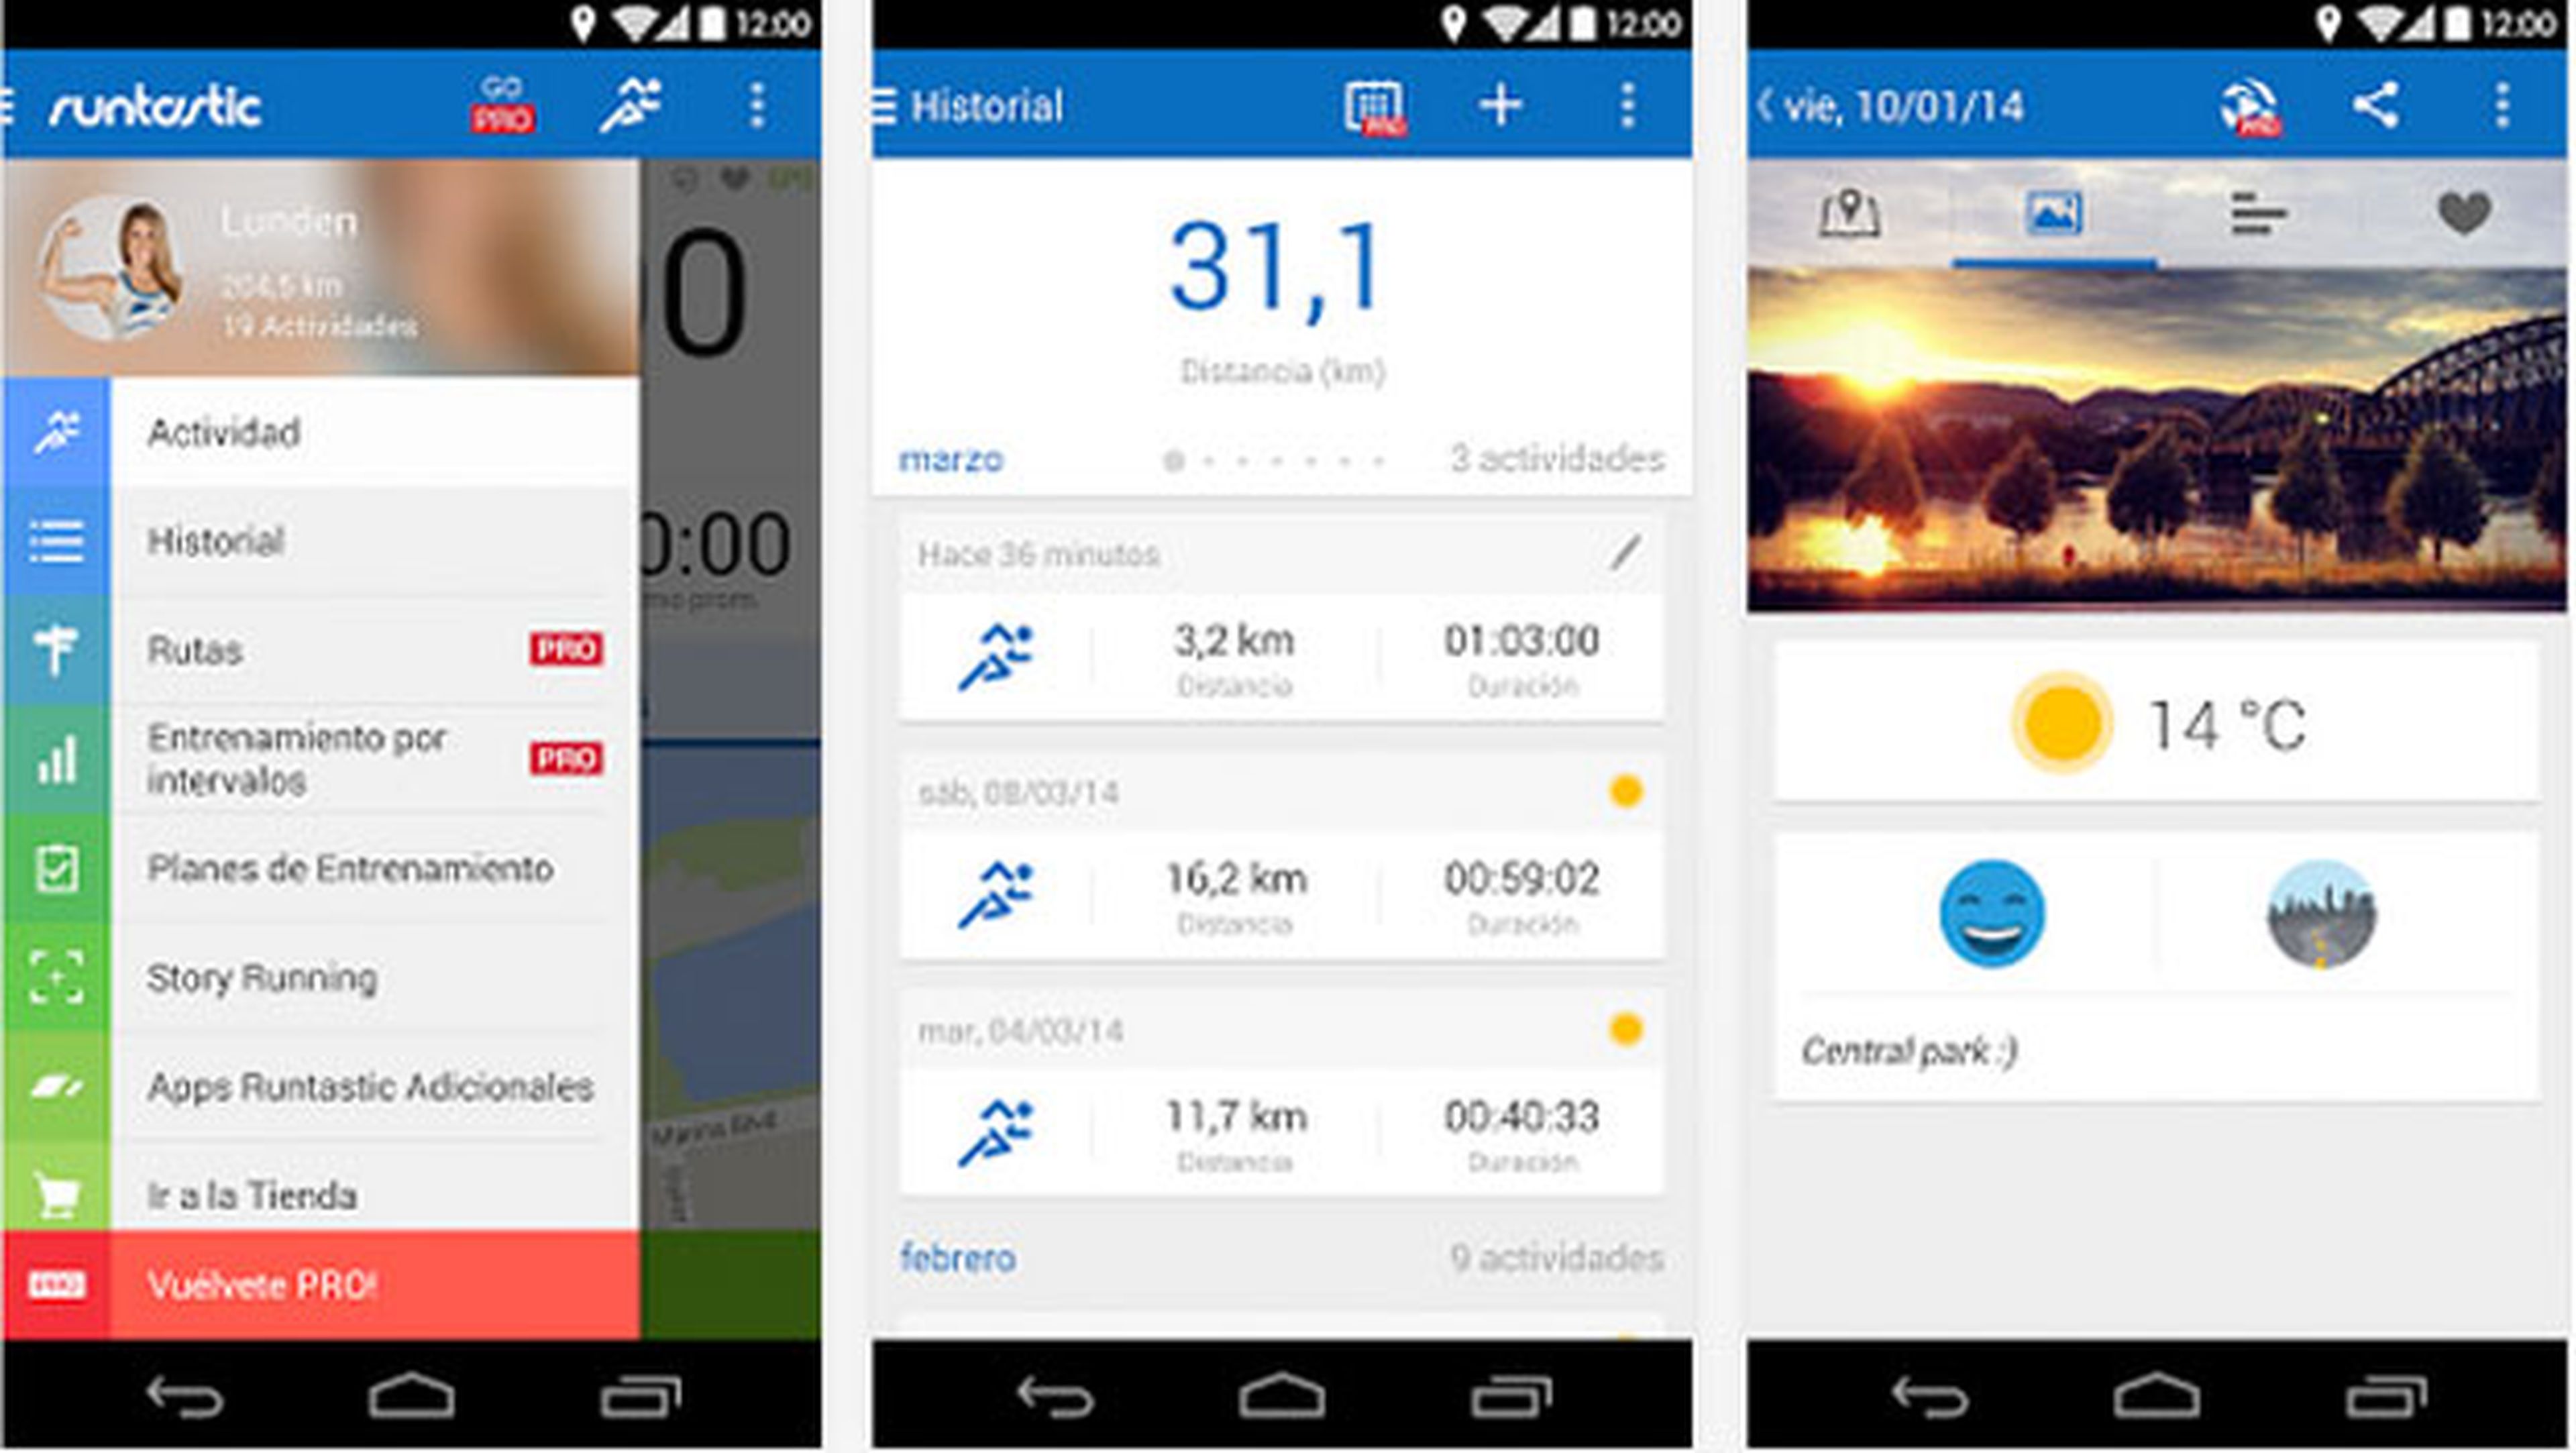 Las 11 mejores apps para hacer deporte (Android e iPhone)